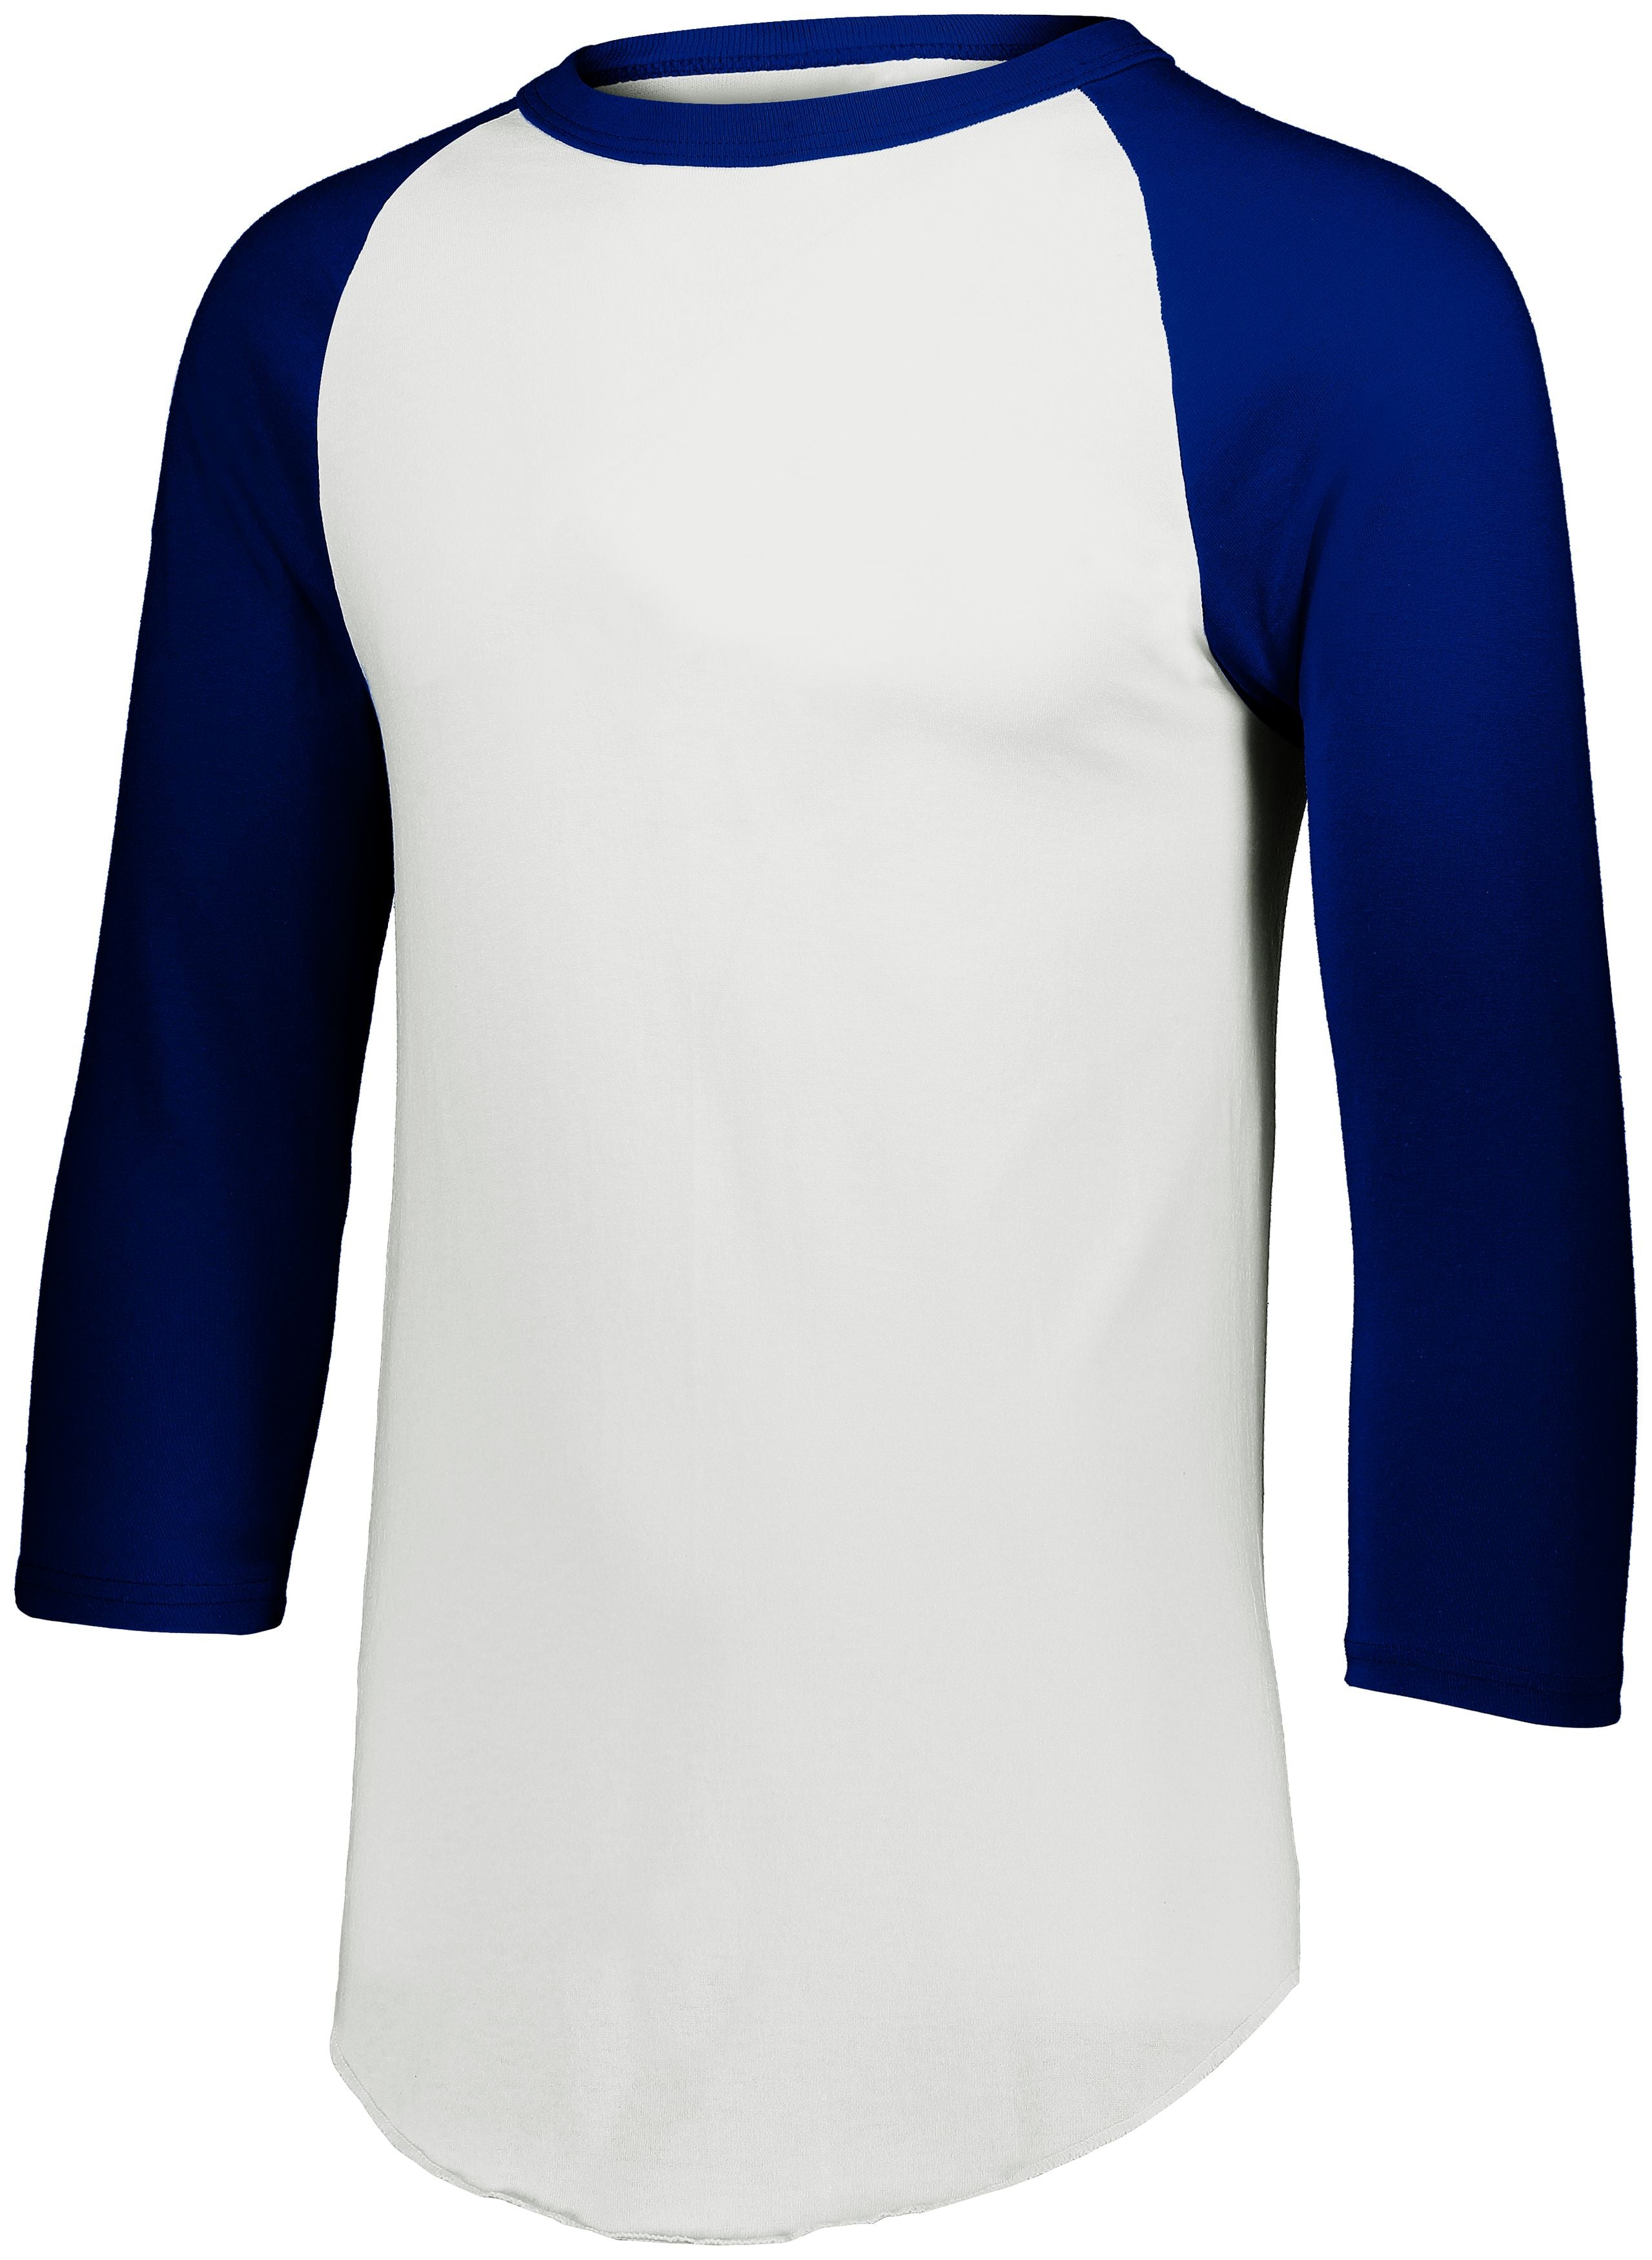 Augusta Sportswear Youth Baseball Jersey 2.0 in White/Navy  -Part of the Youth, Youth-Jersey, Augusta-Products, Baseball, Shirts, All-Sports, All-Sports-1 product lines at KanaleyCreations.com